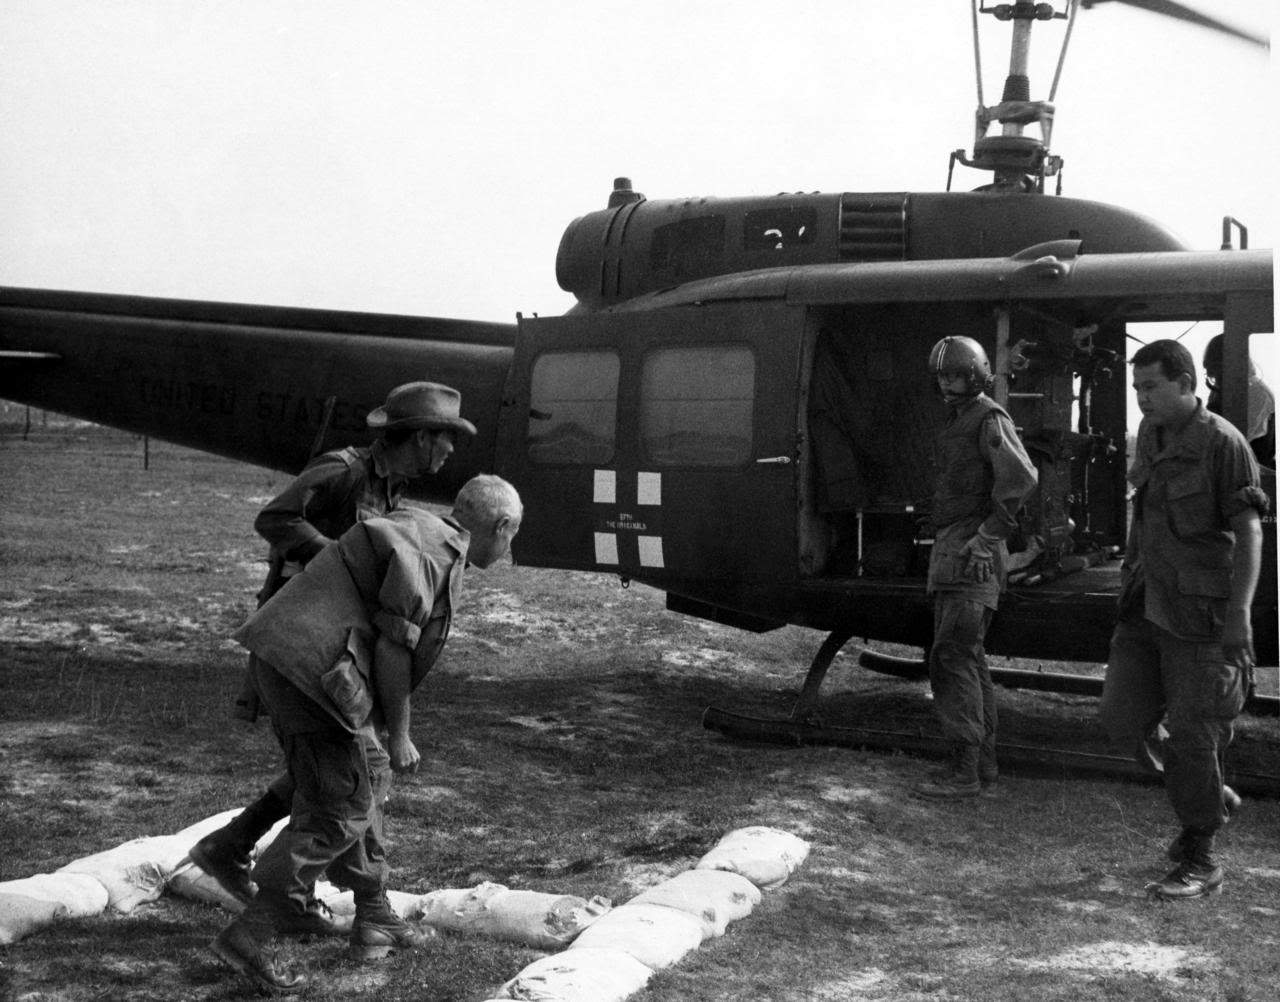 The Army is preparing its medics for a war without medevac helos